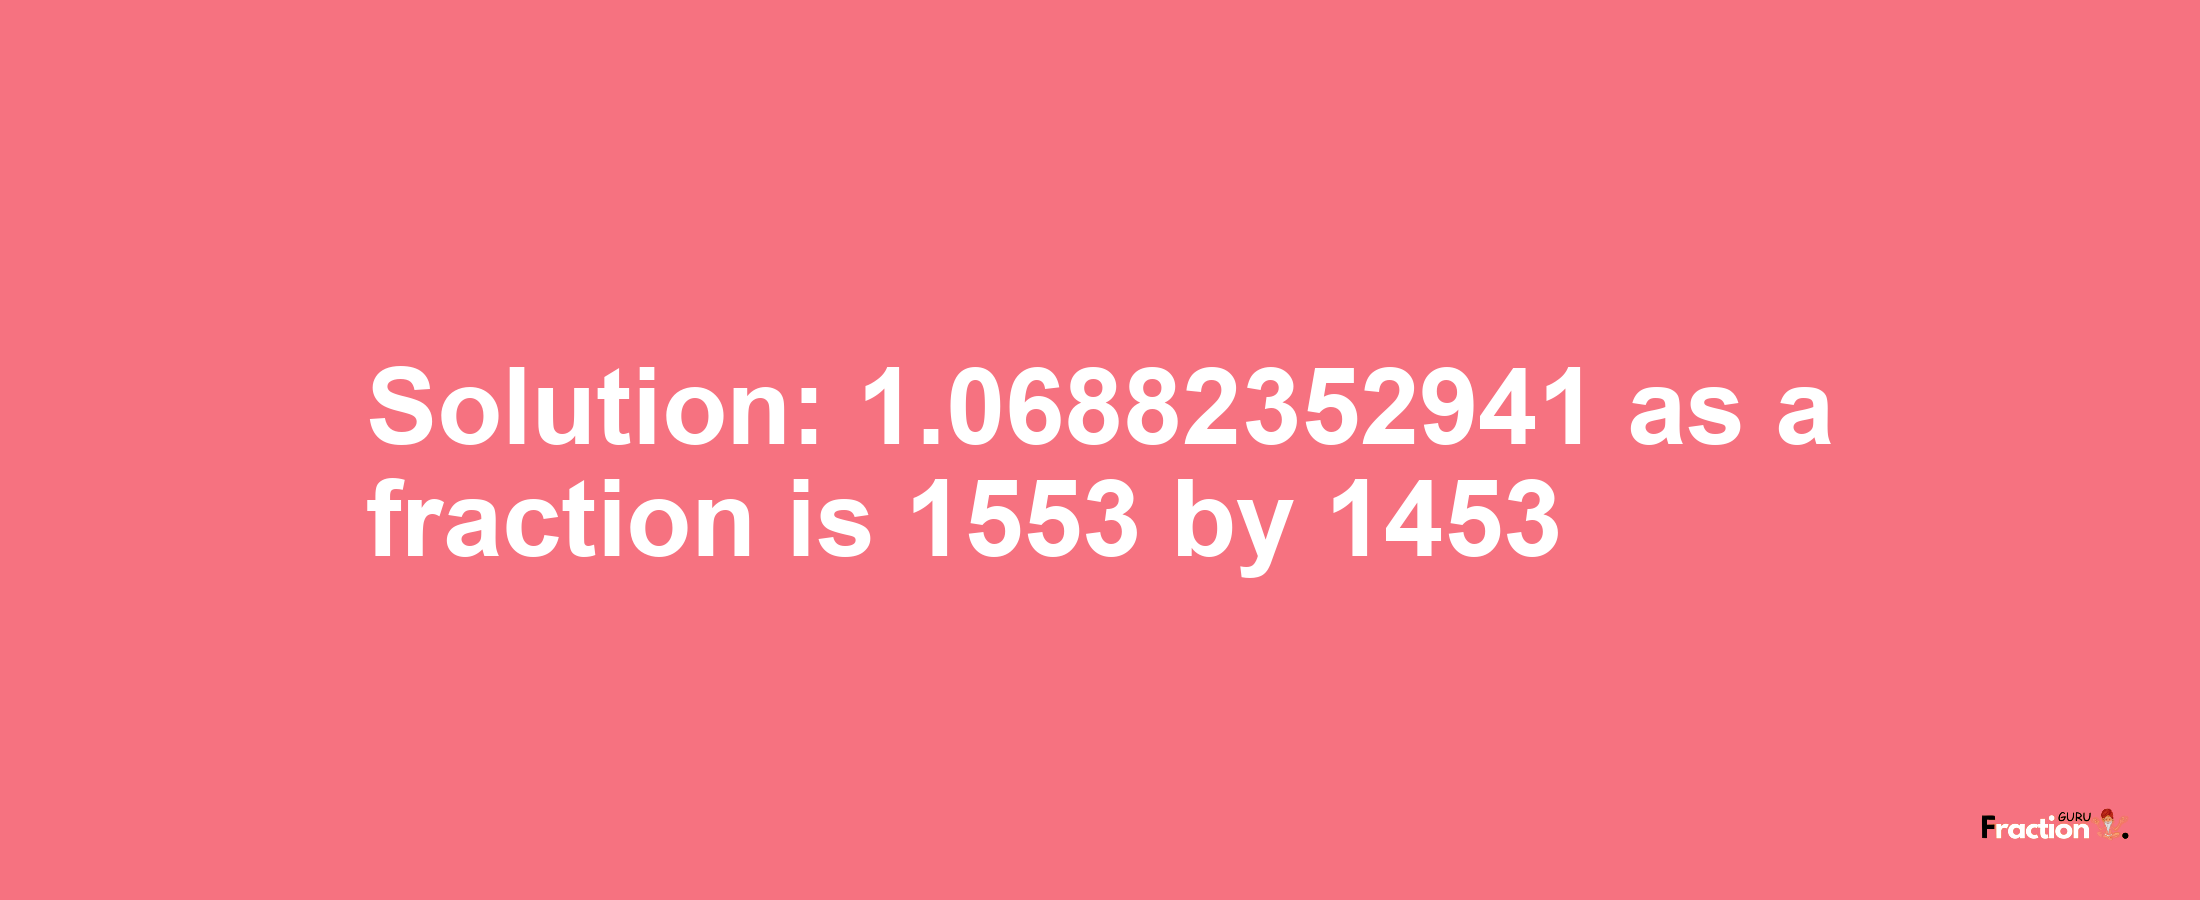 Solution:1.06882352941 as a fraction is 1553/1453